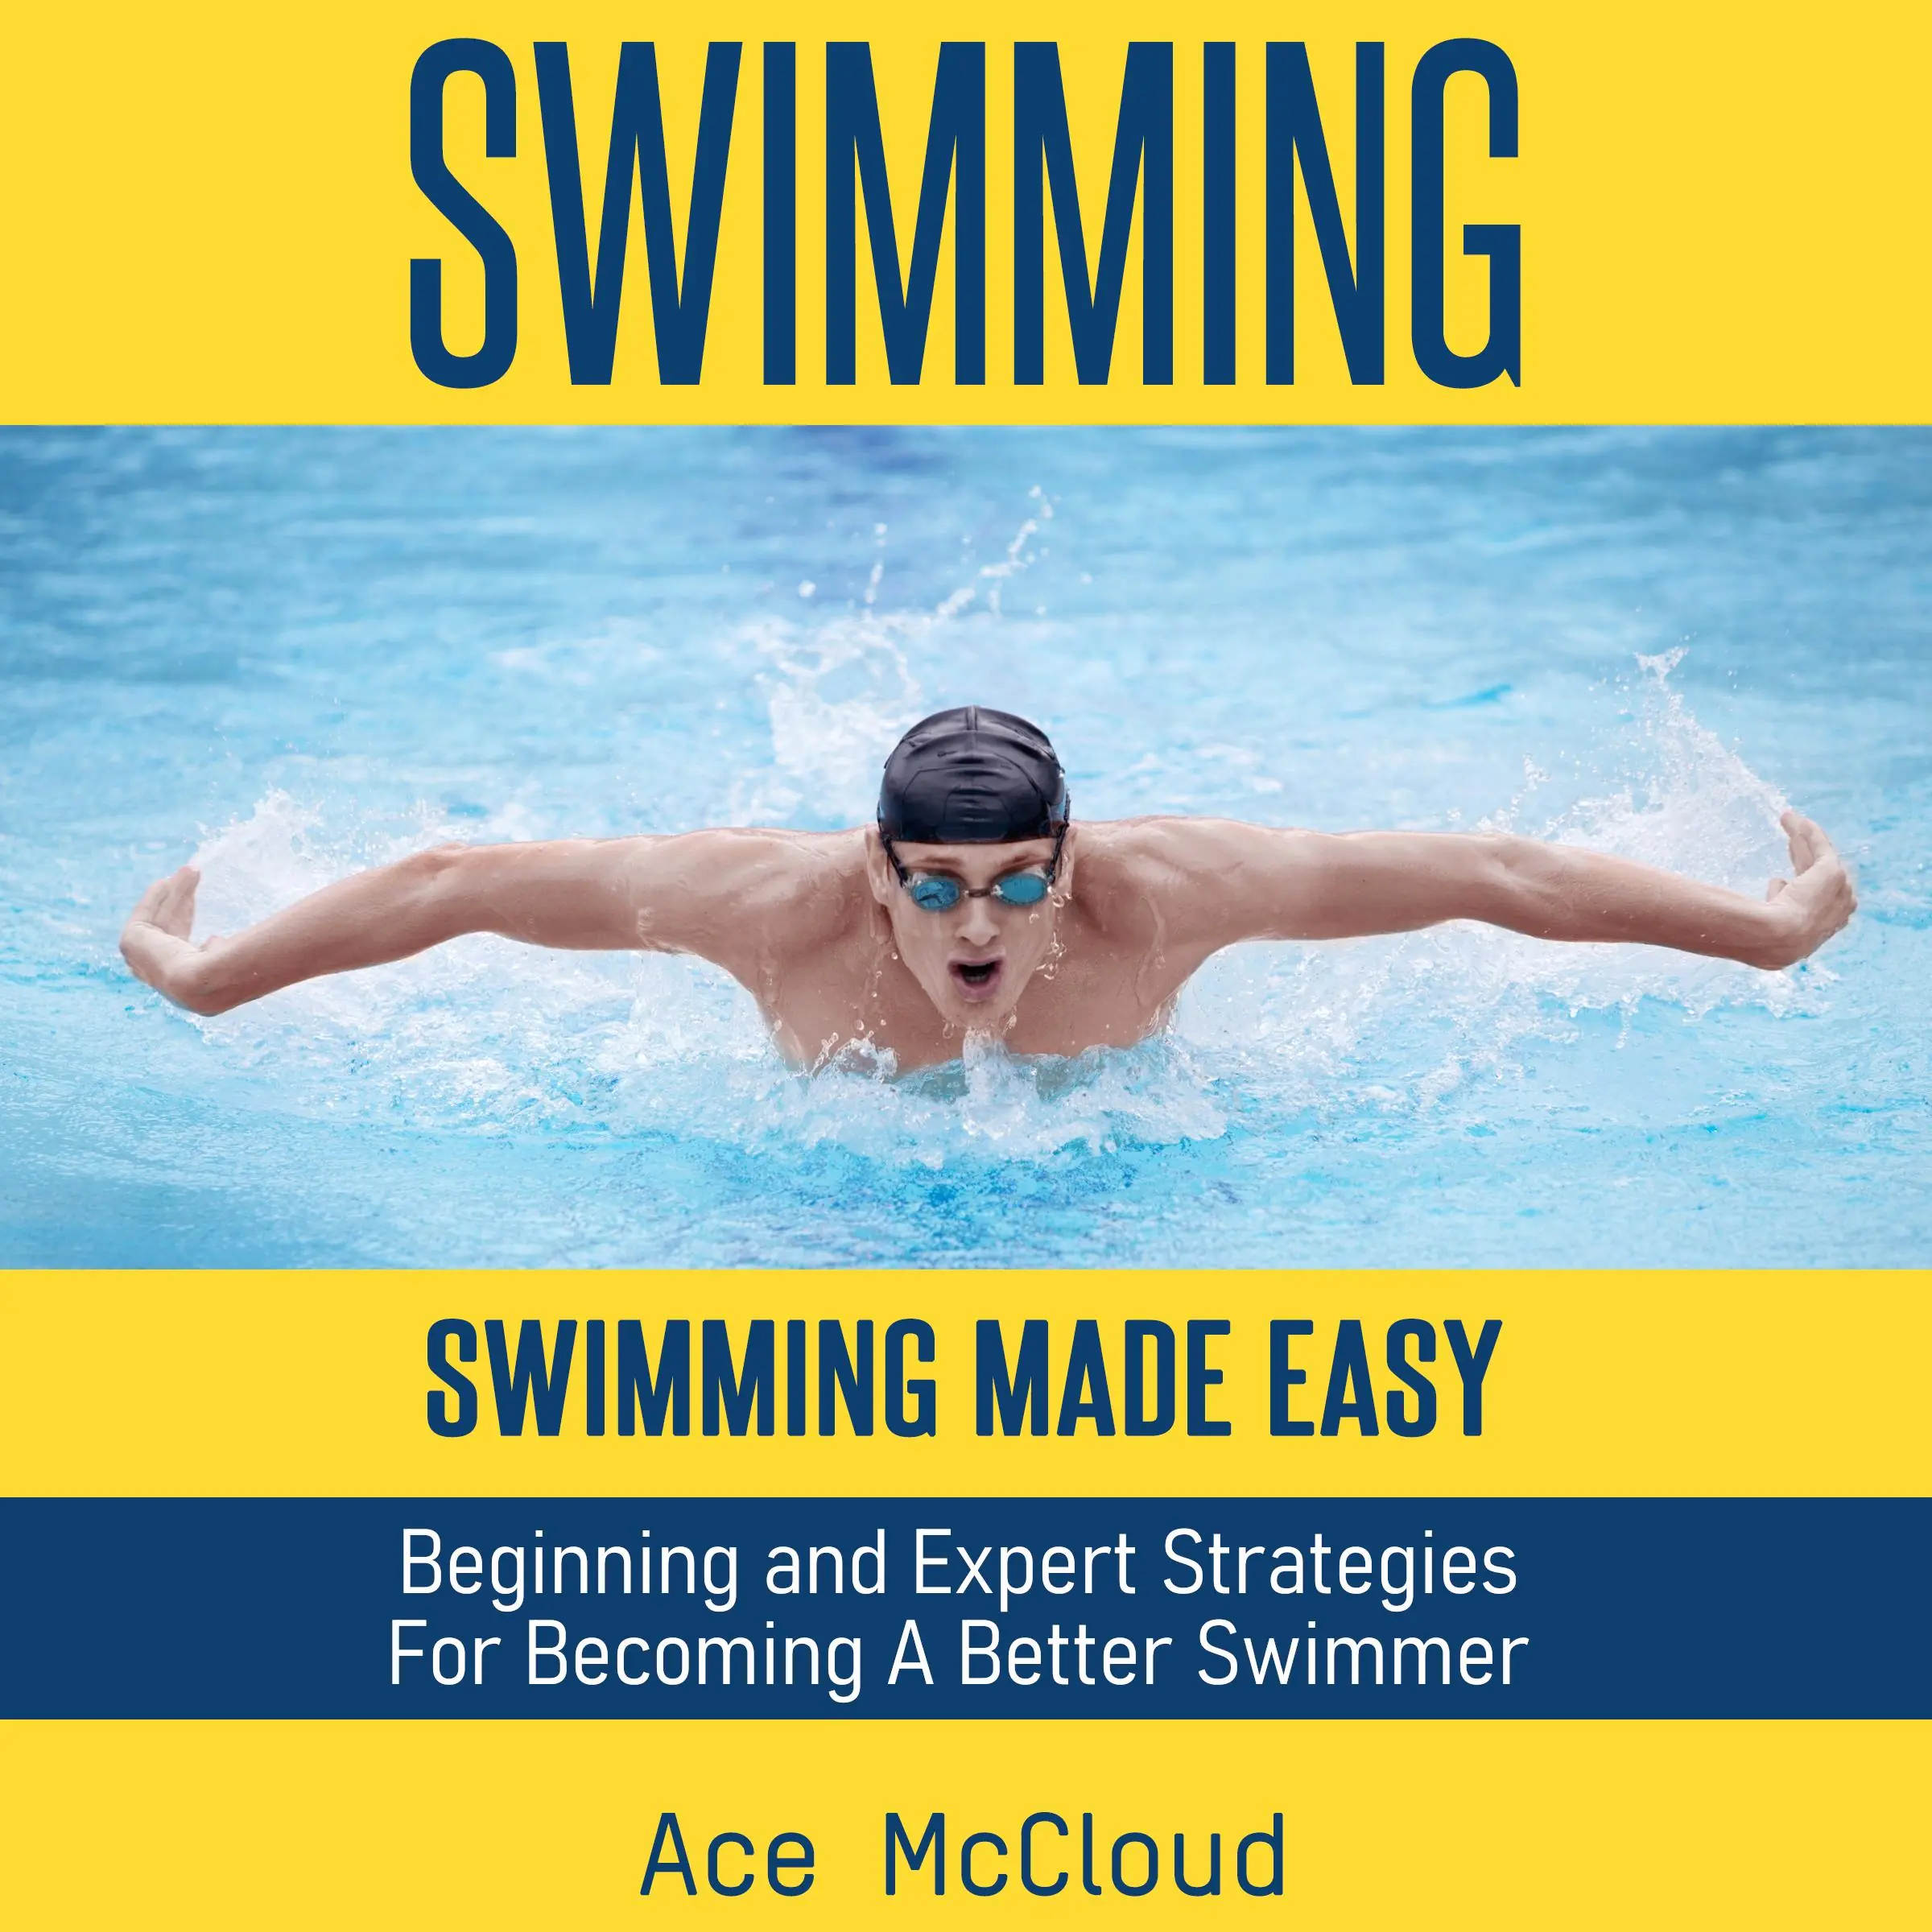 Swimming: Swimming Made Easy: Beginning and Expert Strategies For Becoming A Better Swimmer by Ace McCloud Audiobook